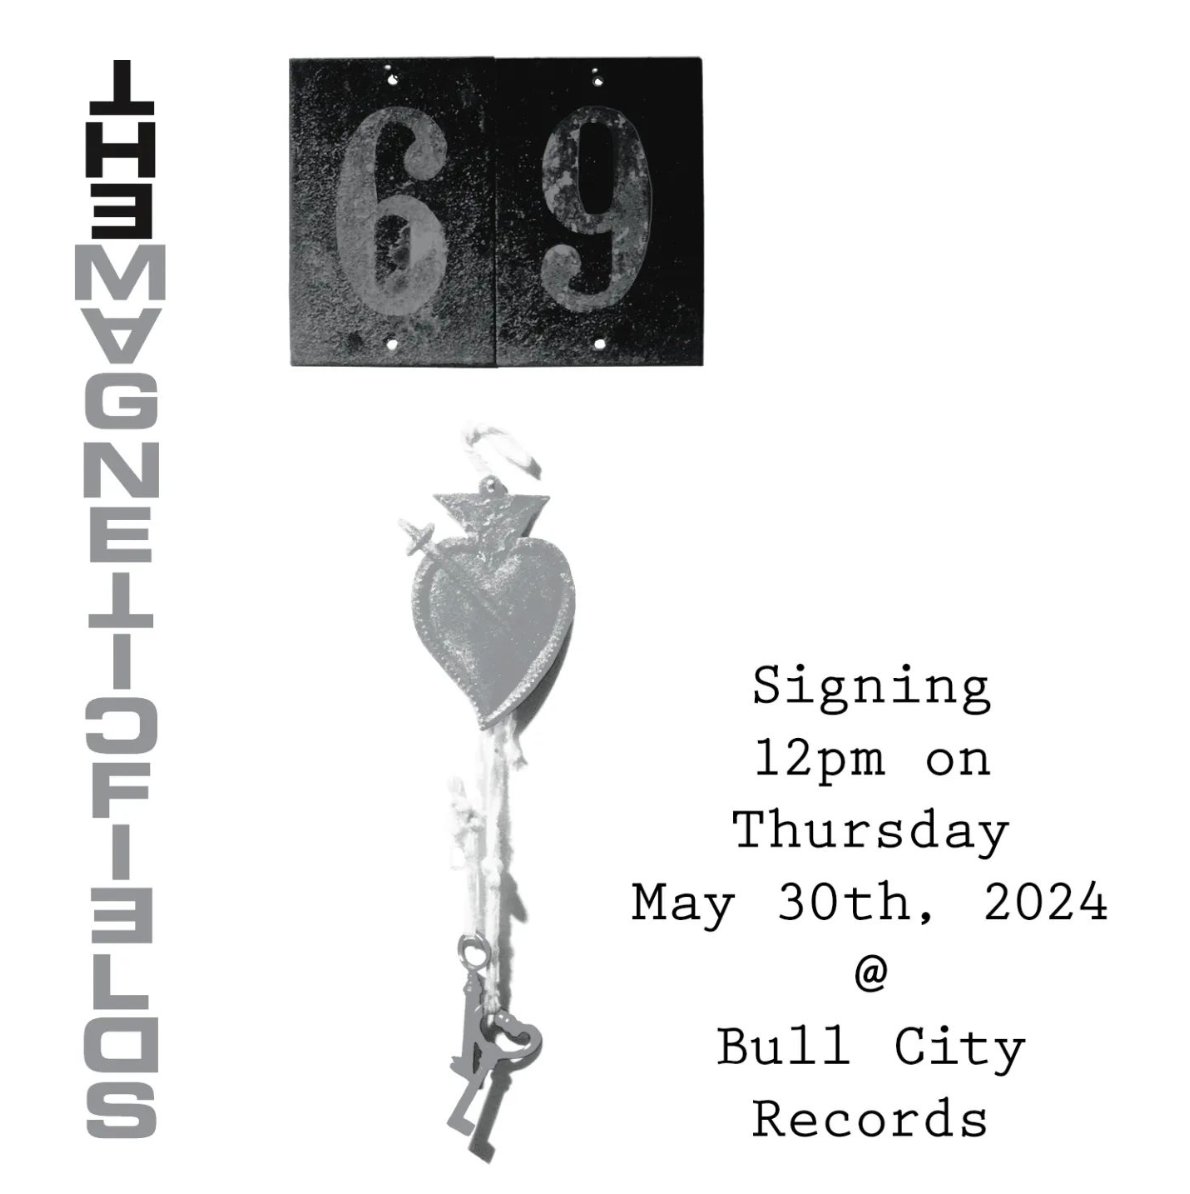 Announcing: @TheMagFields in-store signing! Thursday 5/30 at @bullcityrecords, 12-1 PM. Free & Open to the Public! Bring your records, or better yet, pick some up! The band is playing 69 Love Songs over two nights at @CarolinaDurham on 5/29 + 30! Tix: tinyurl.com/3bmruxzf